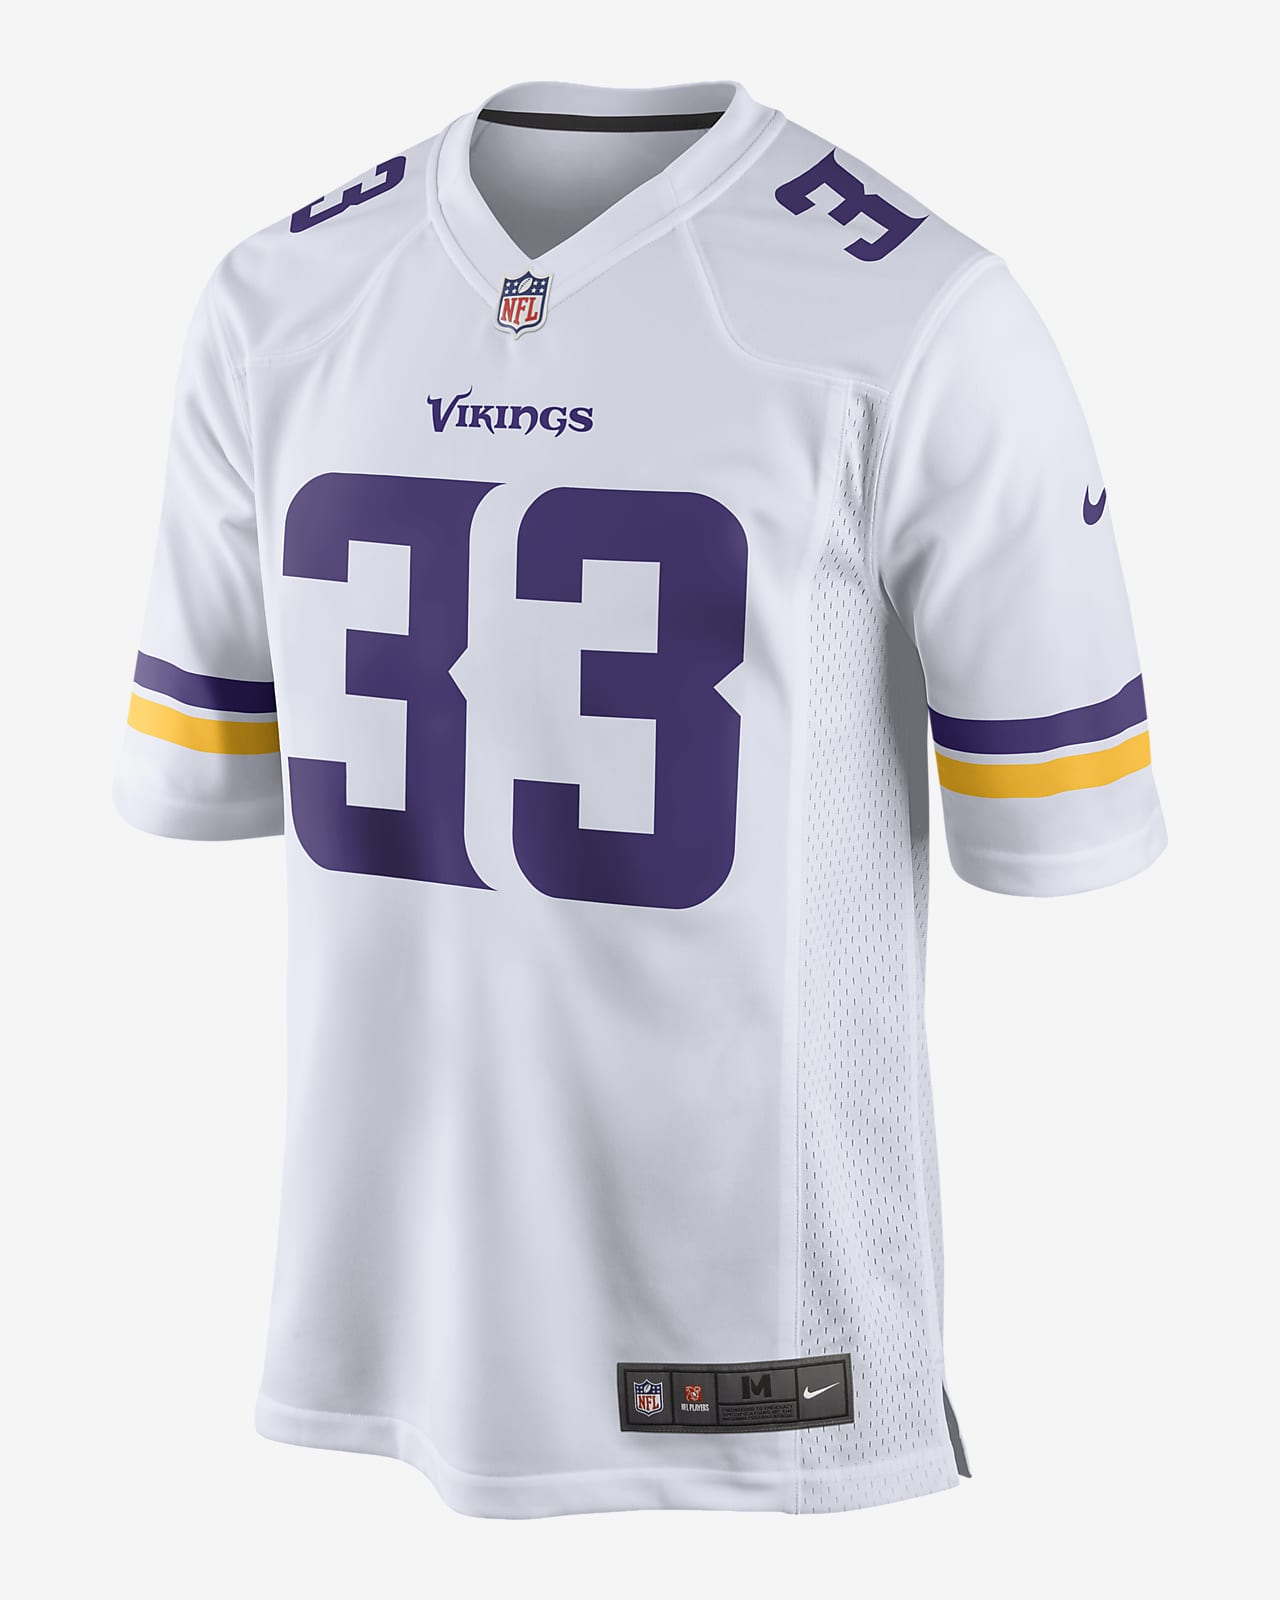 dalvin cook jersey